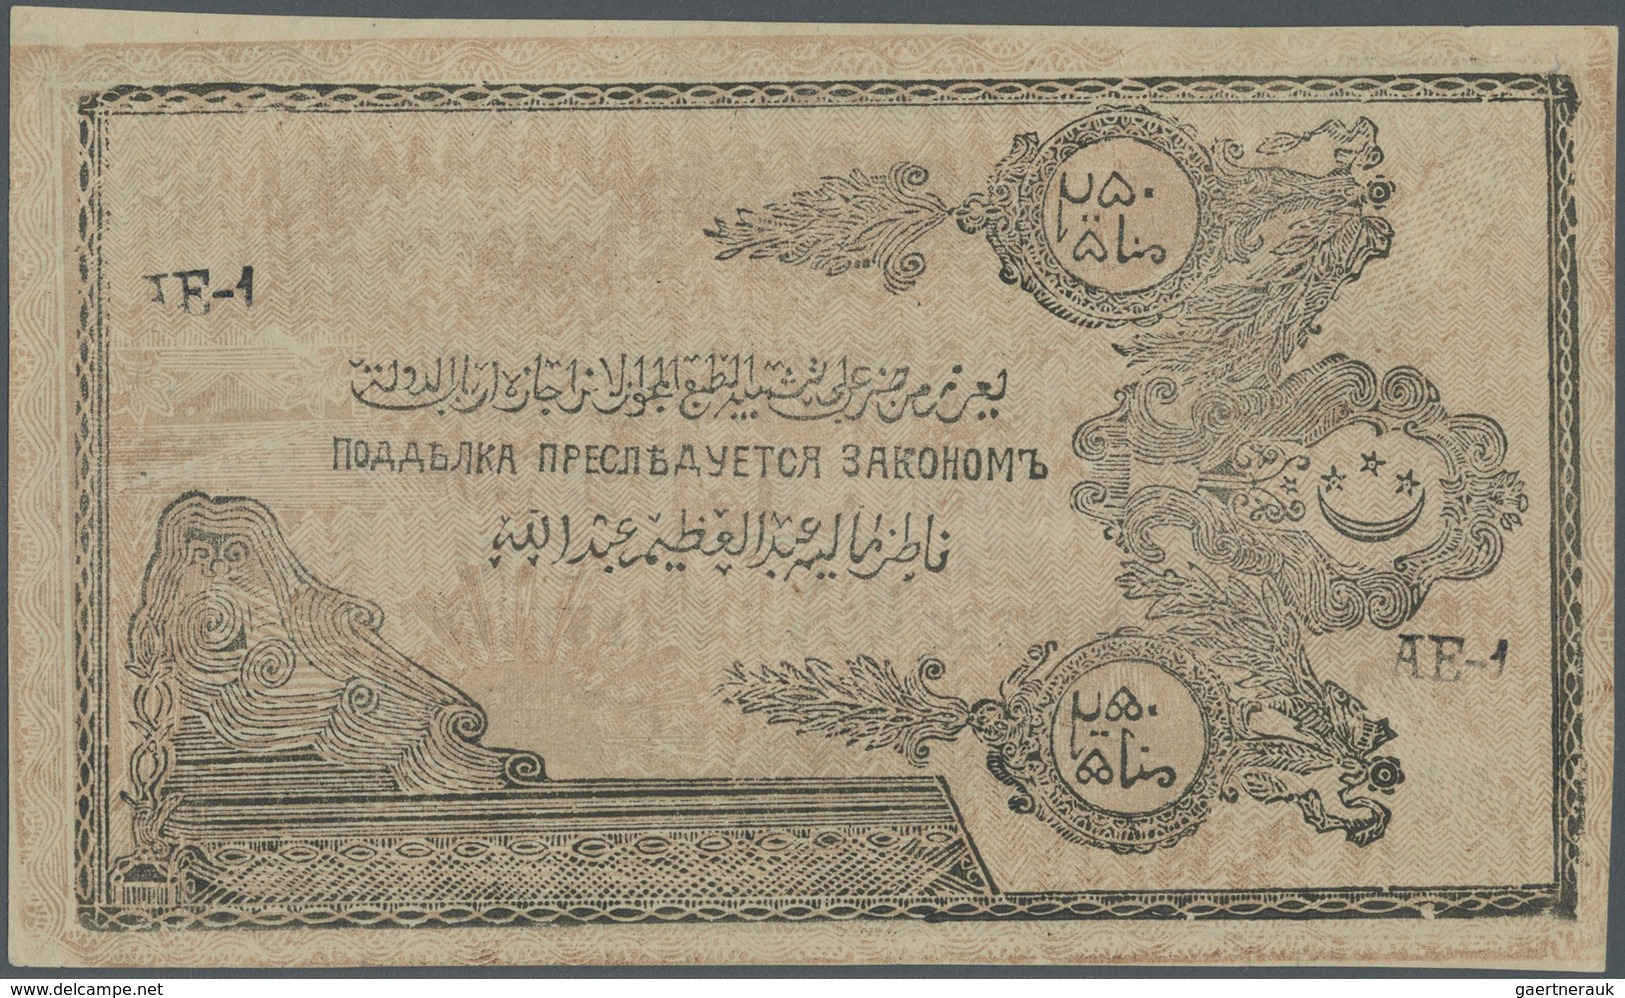 Russia / Russland: 250 Rubles 1919 P. S476a, Unfolded But With Creases In In Paper, Condition: XF. - Russia